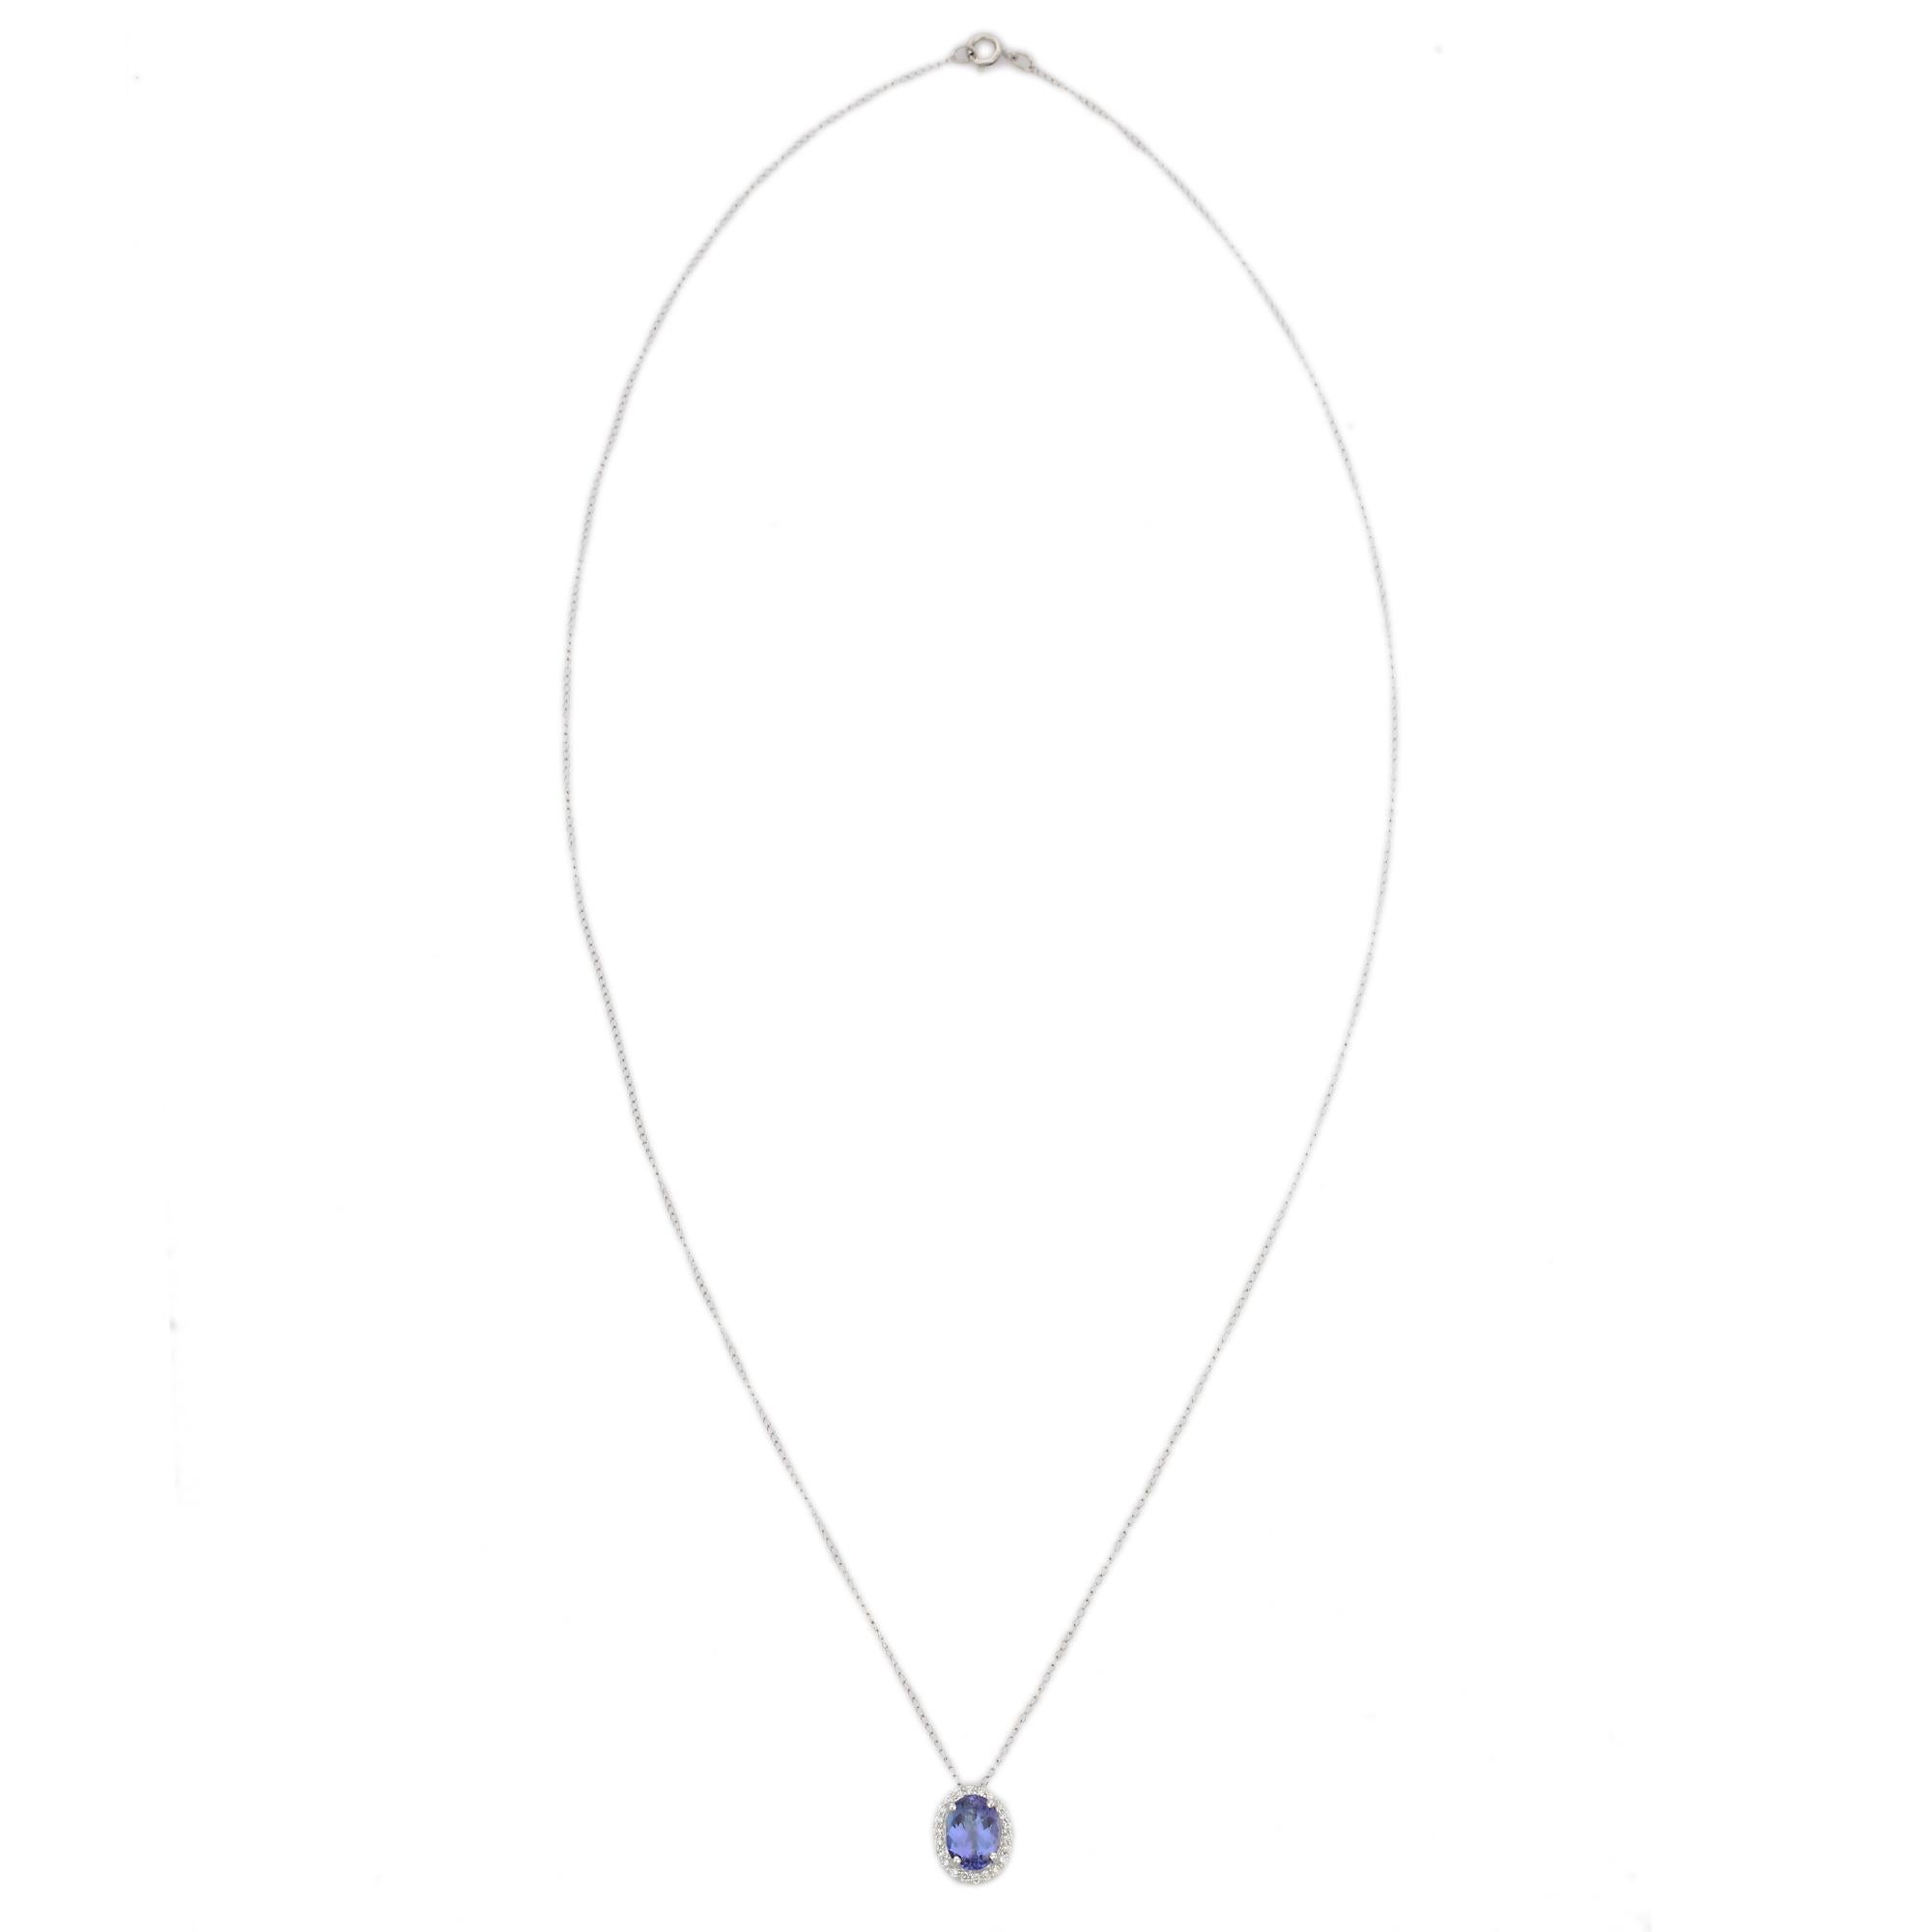 Everyday Halo Diamond Tanzanite Solitaire Necklace in 18K Gold with diamond studded around oval tanzanite. This stunning piece of jewelry instantly elevates a casual look or dressy outfit. 
Tanzanite brings energy, calmness and happiness into life.